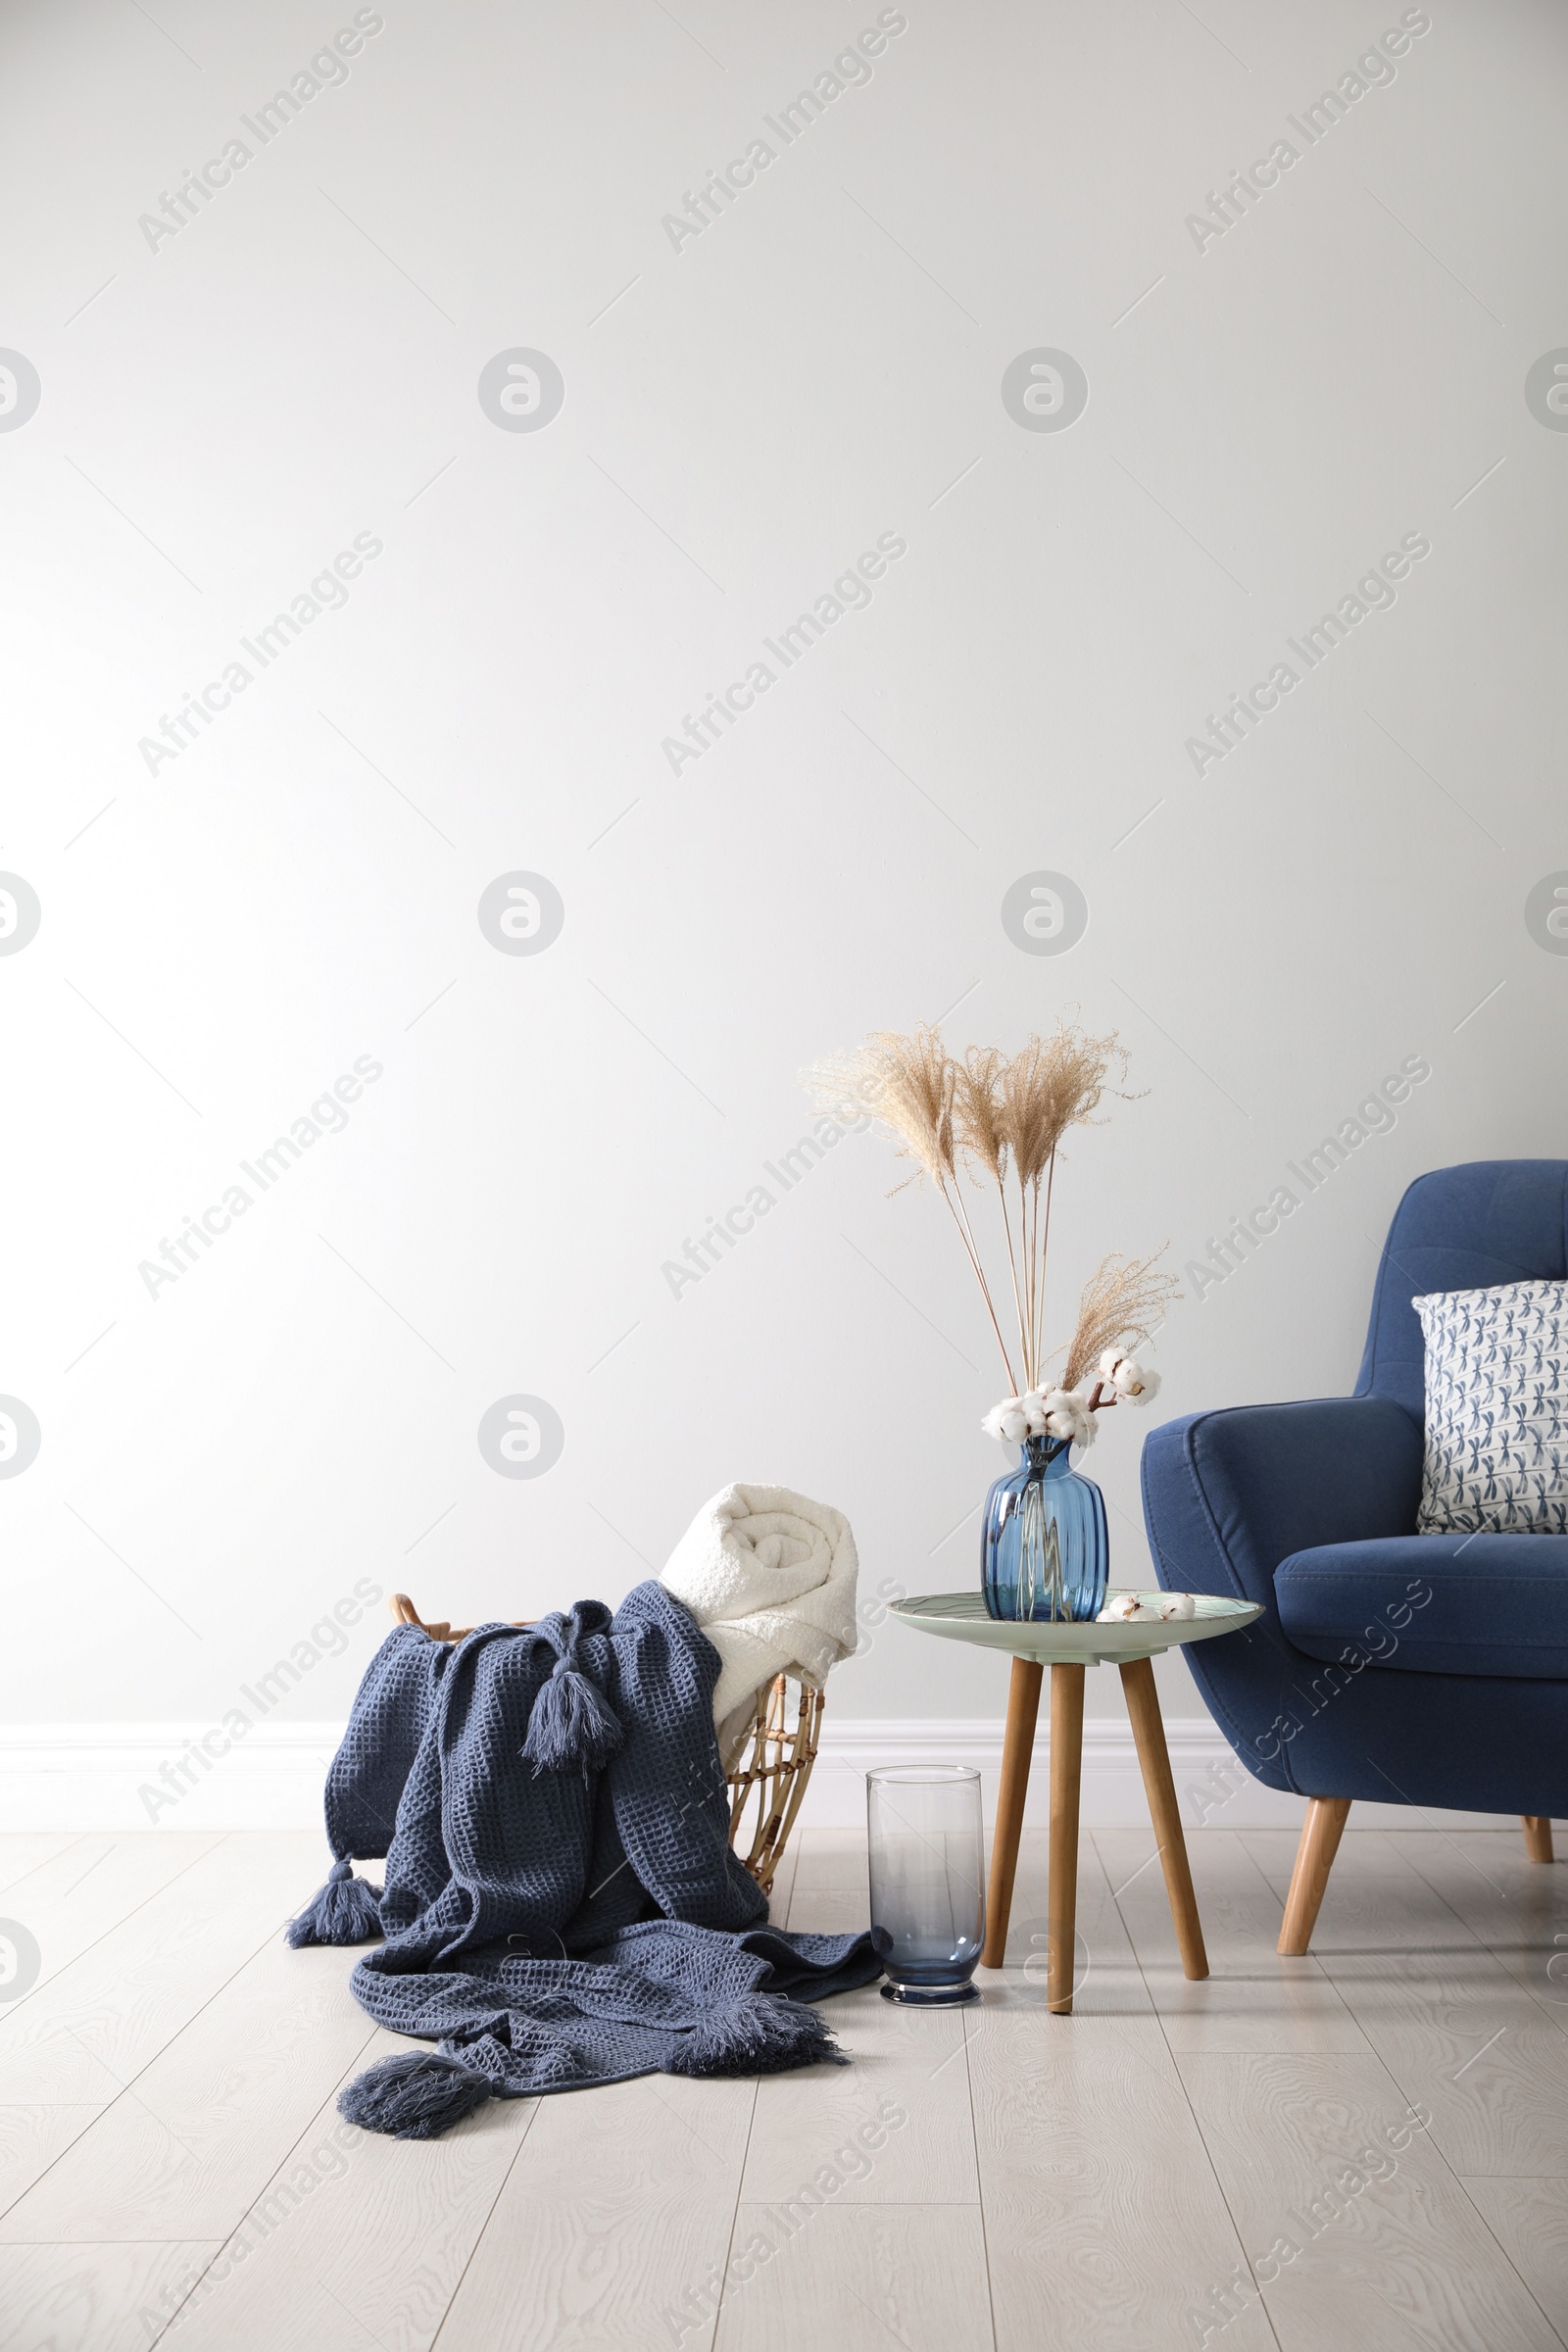 Photo of Basket with soft plaids in living room interior